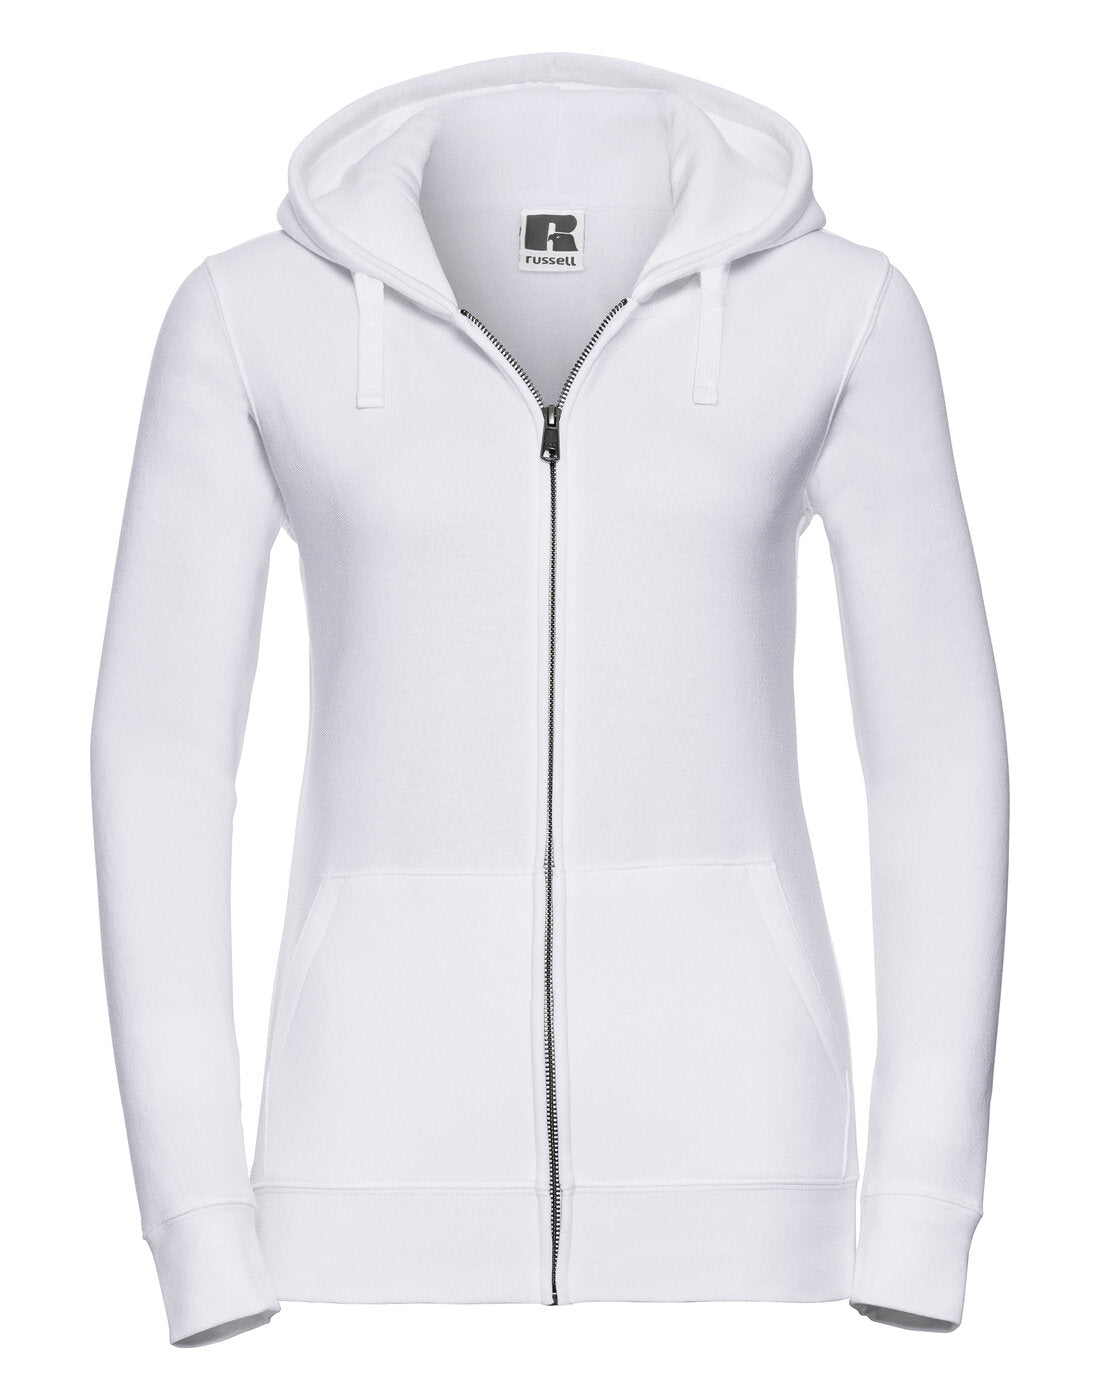 Russell Ladies Authentic Zipped Hood White